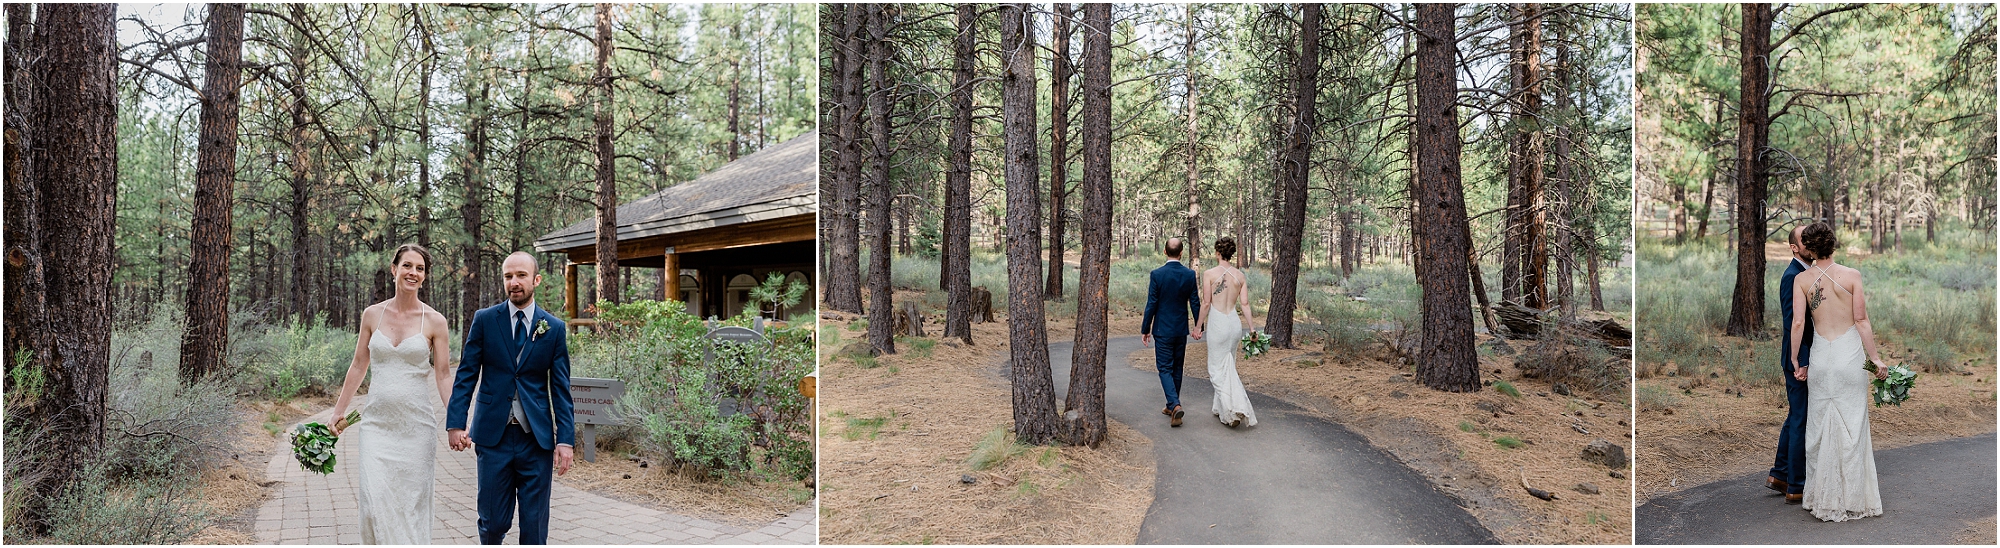 A bride and groom walks the paths together during their High Desert Museum wedding in Bend, OR. | Erica Swantek Photography